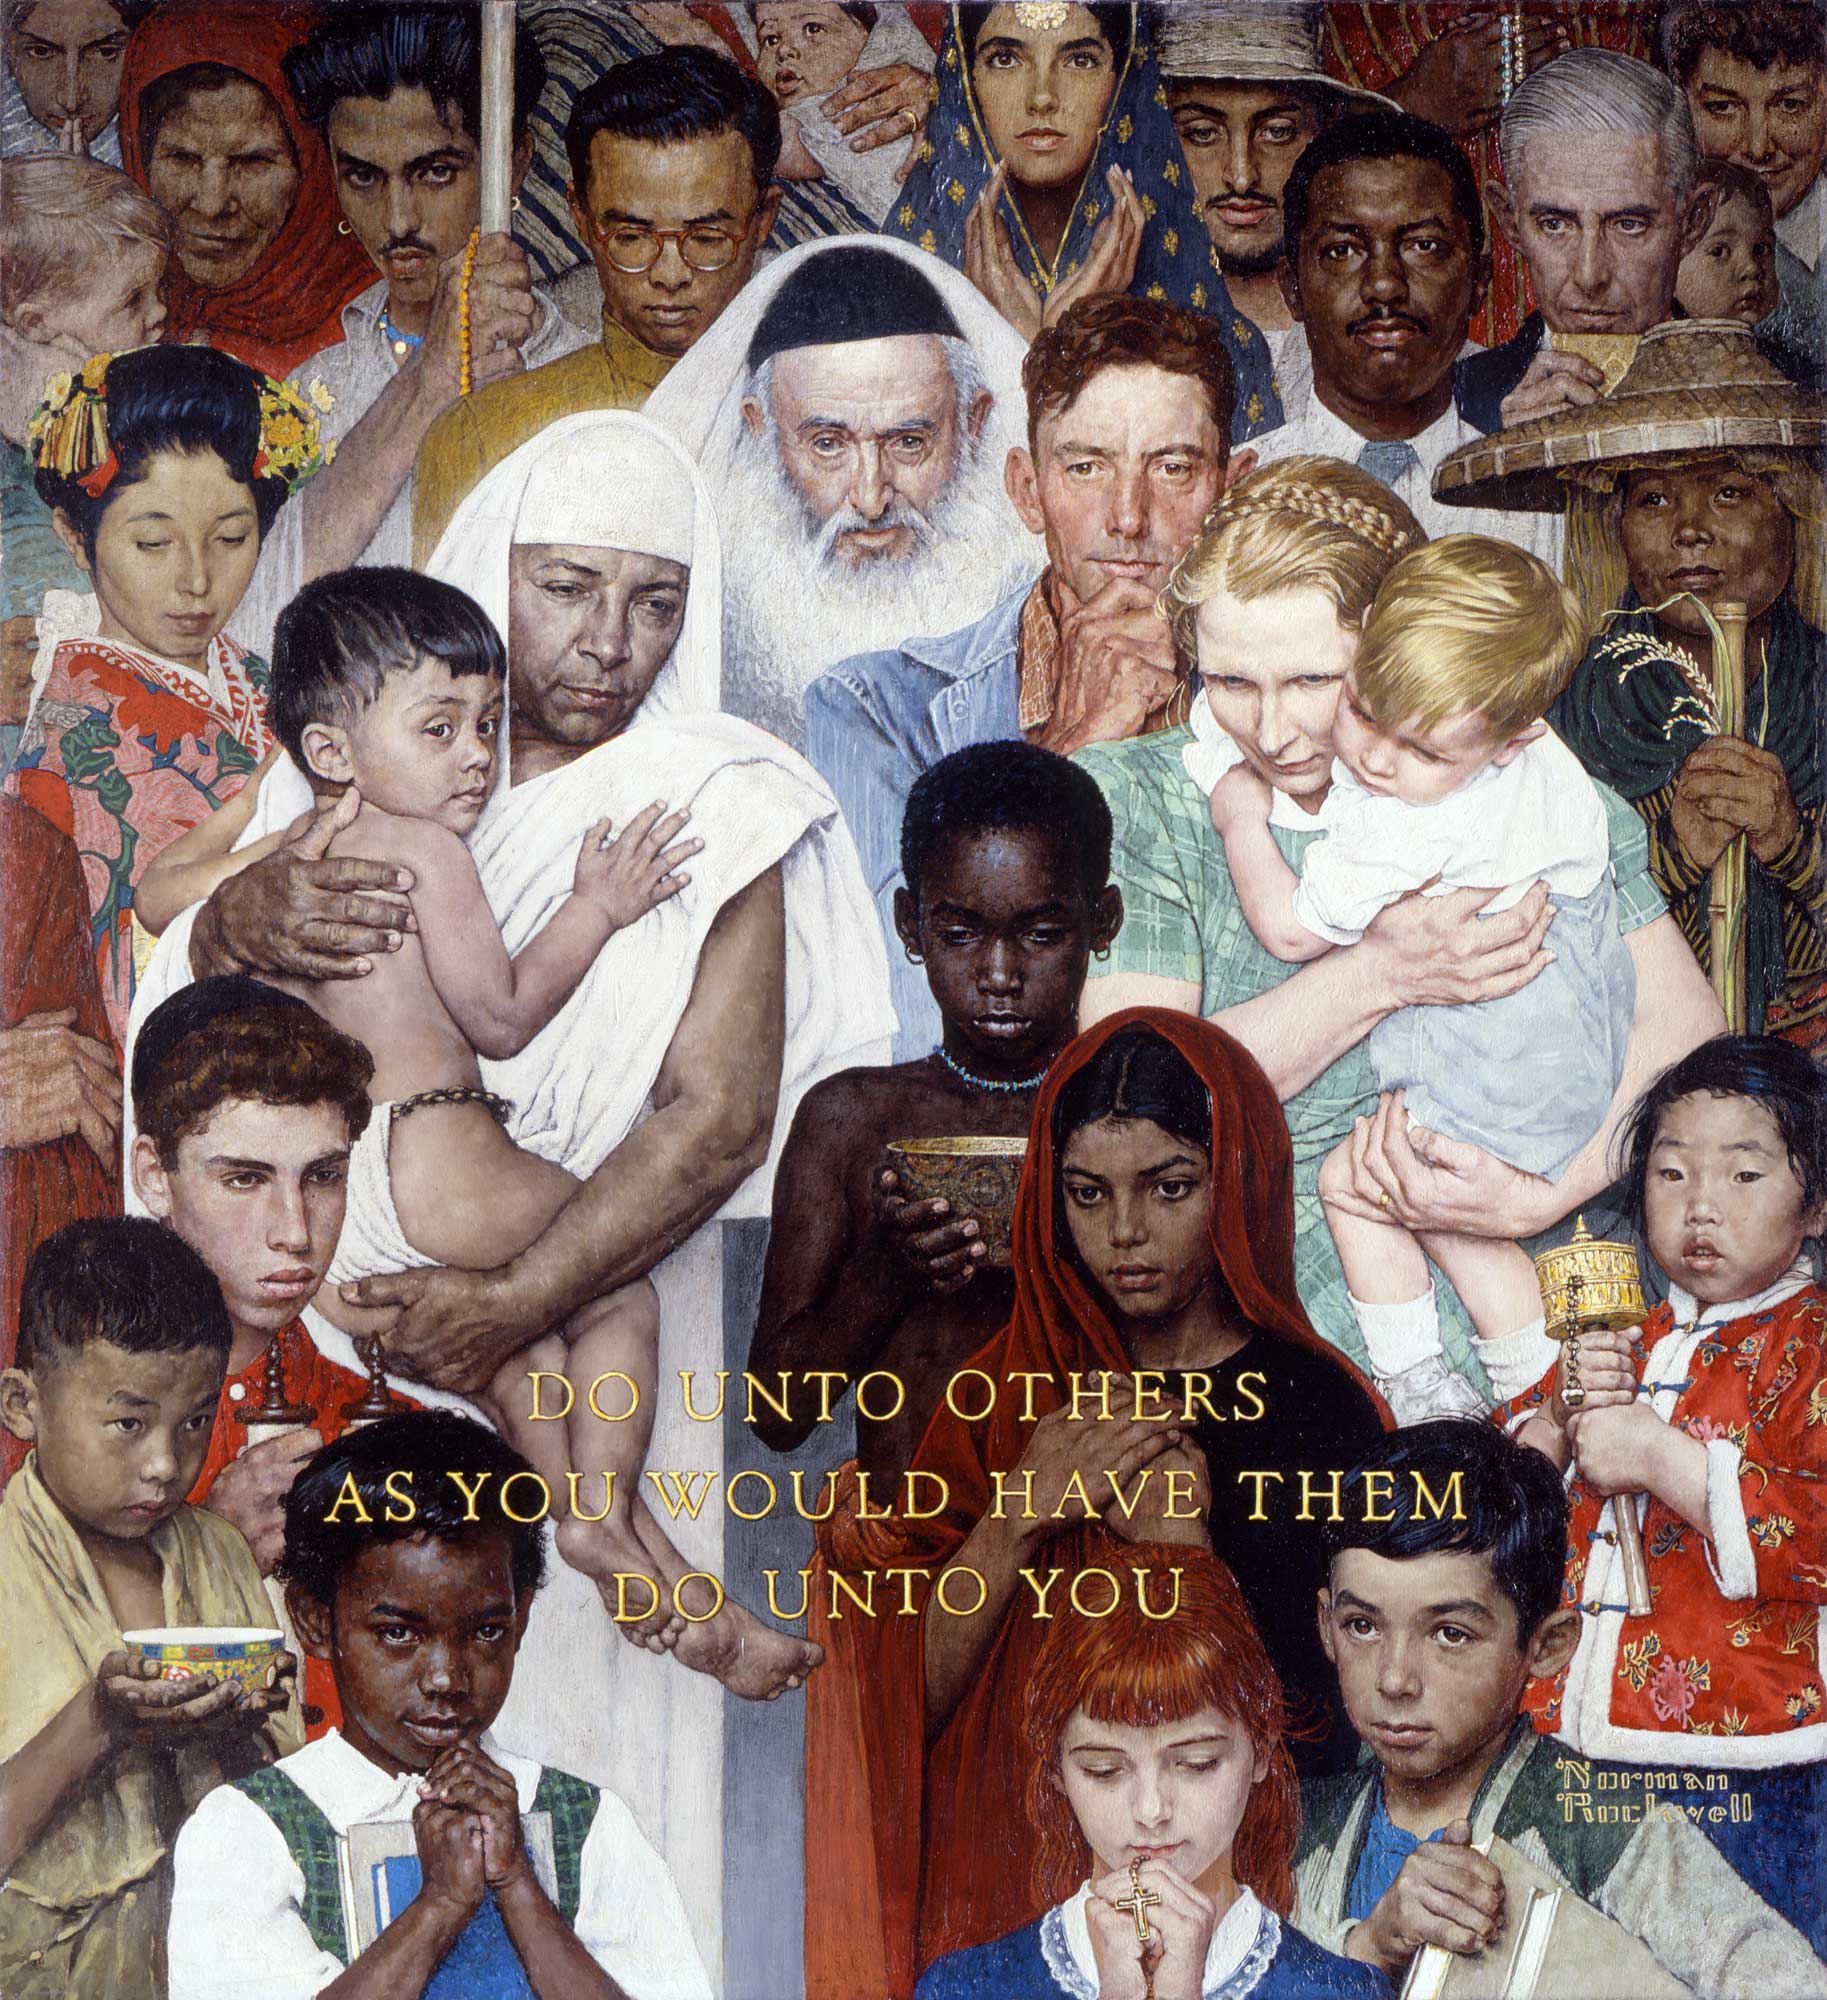  Norman Rockwell (1894-1978), ‘Golden Rule,’ 1961. Oil on canvas. Cover illustration for The Saturday Evening Post, April 1, 1961. Collection of Norman Rockwell Museum. © 1961 SEPS: Curtis Licensing, Indianapolis, IN. All rights reserved